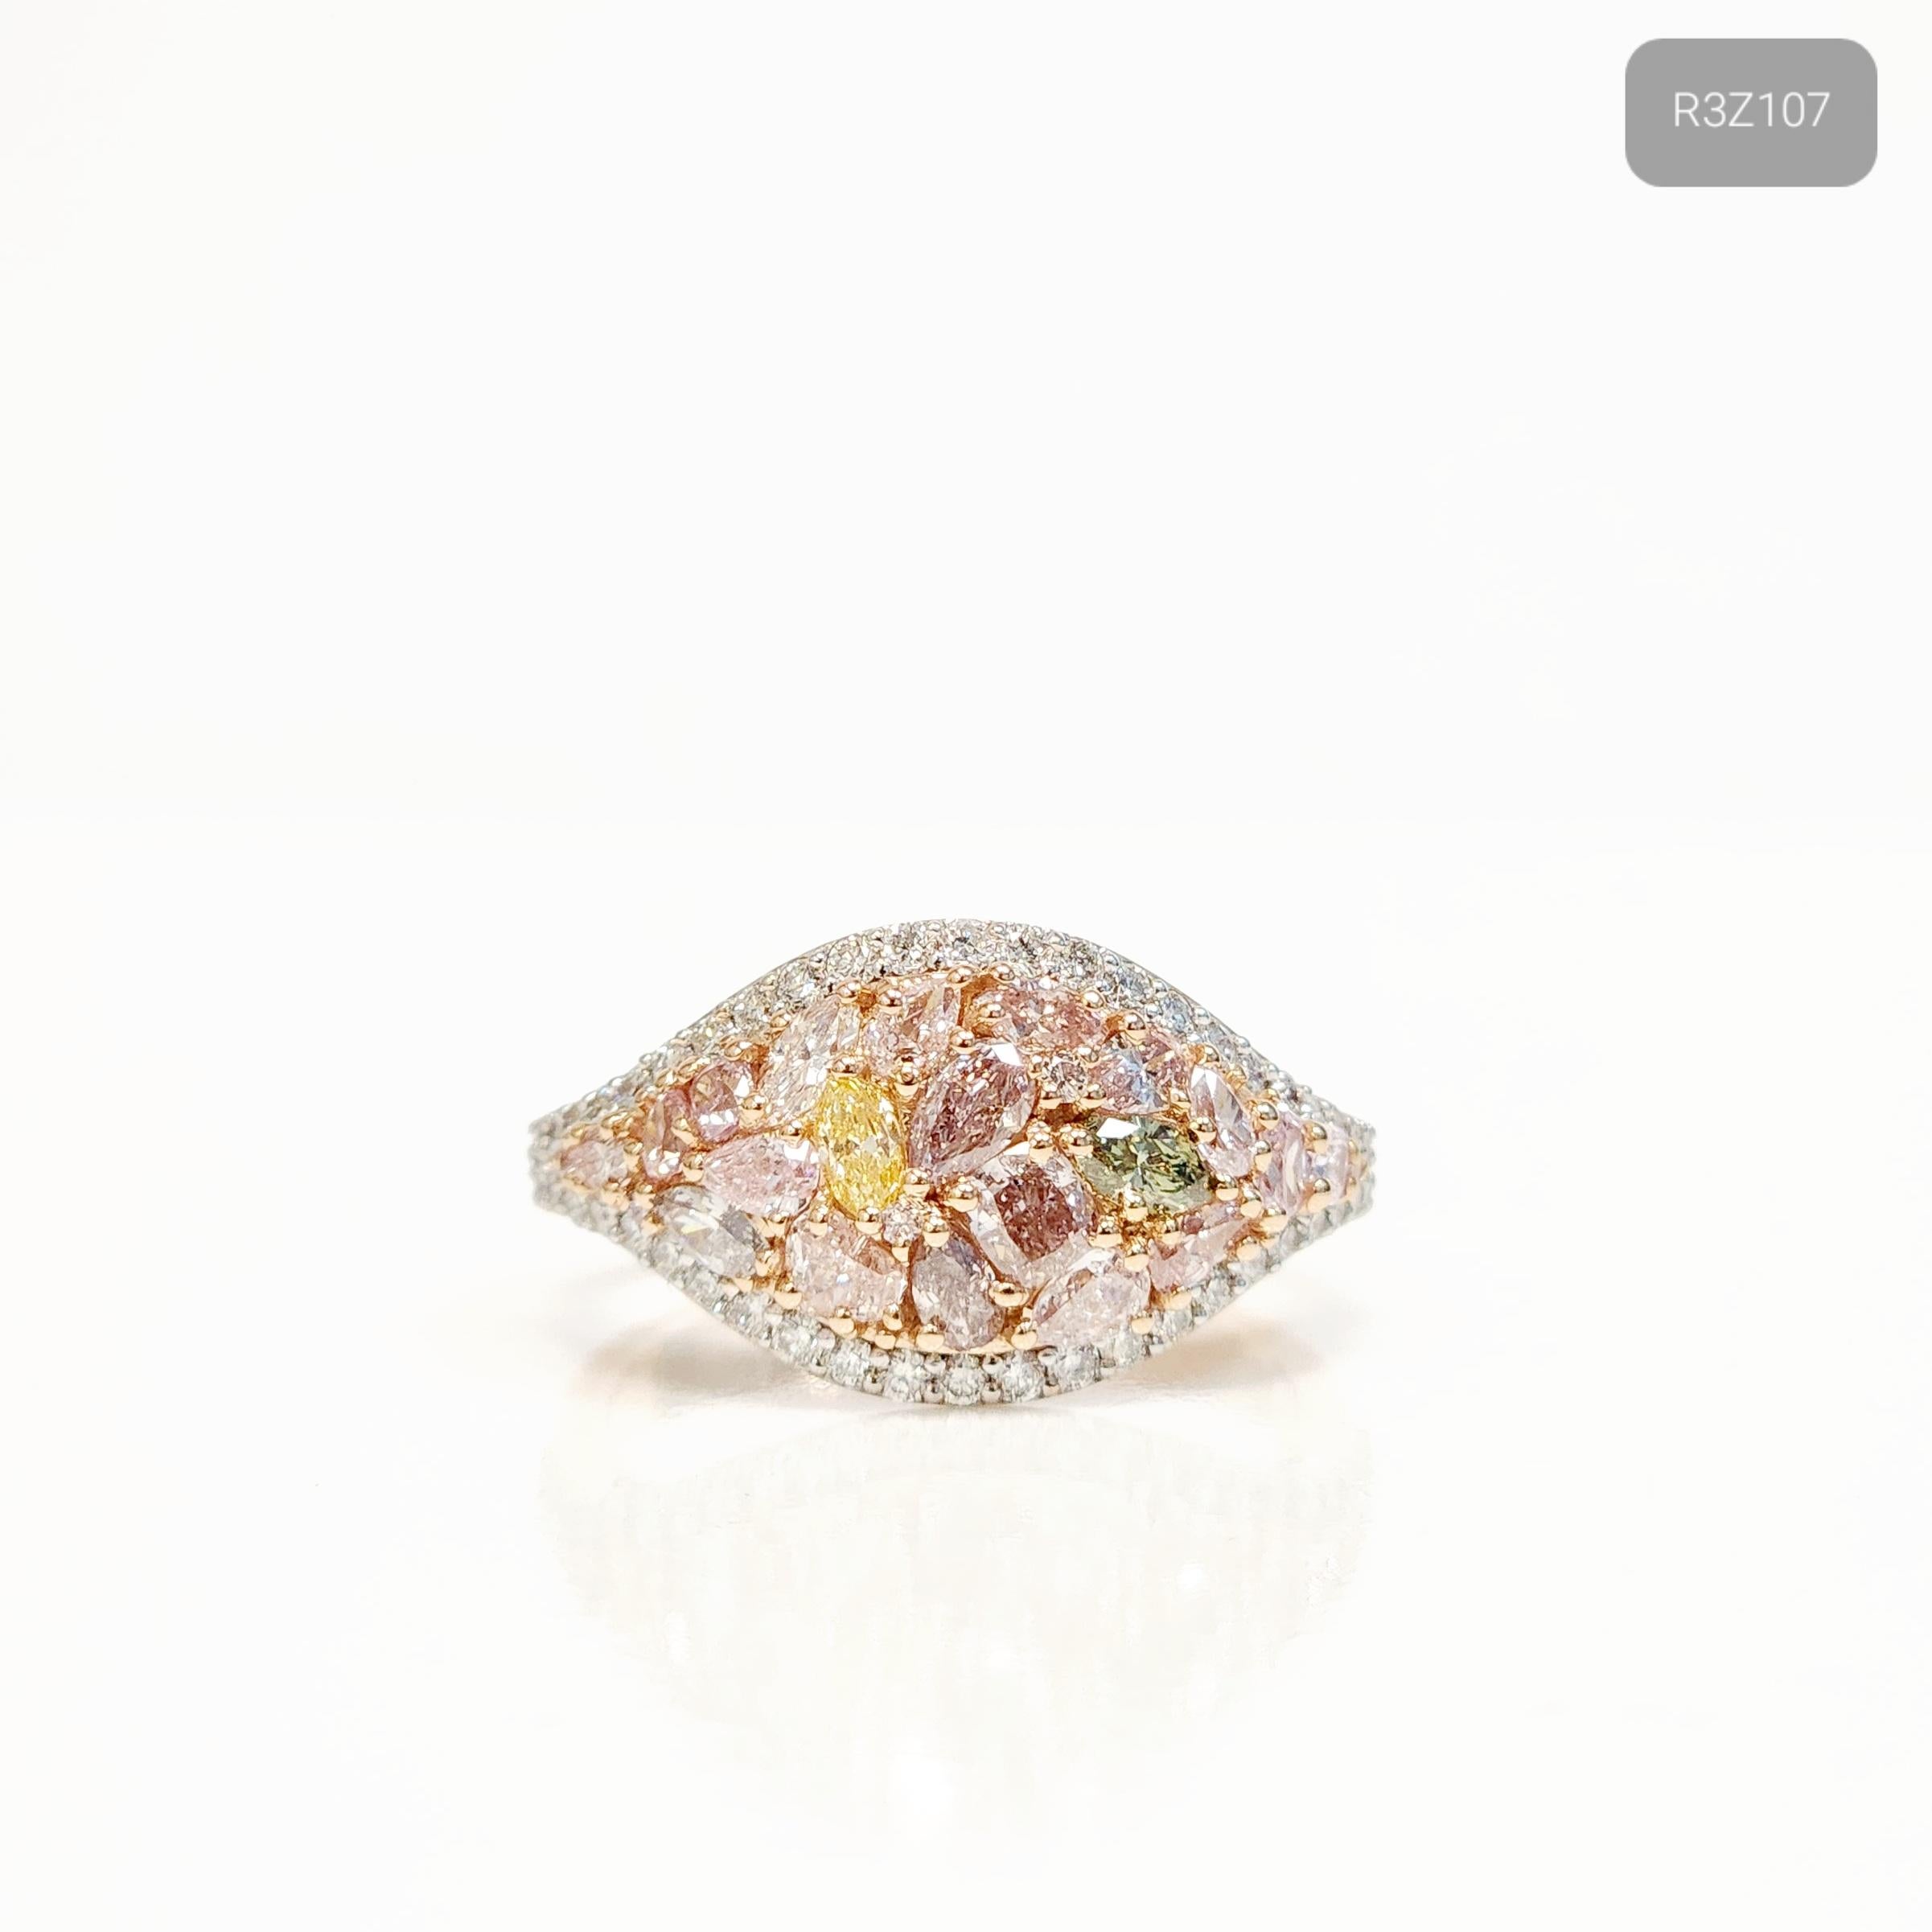 Adorn your finger with the exquisite beauty of the Fancy Shaped Mix Diamond Ring. This captivating piece features a stunning array of 1.19 carats mixed shaped fancy colored diamonds in mesmerizing shades of pink, yellow, and green diamonds which are